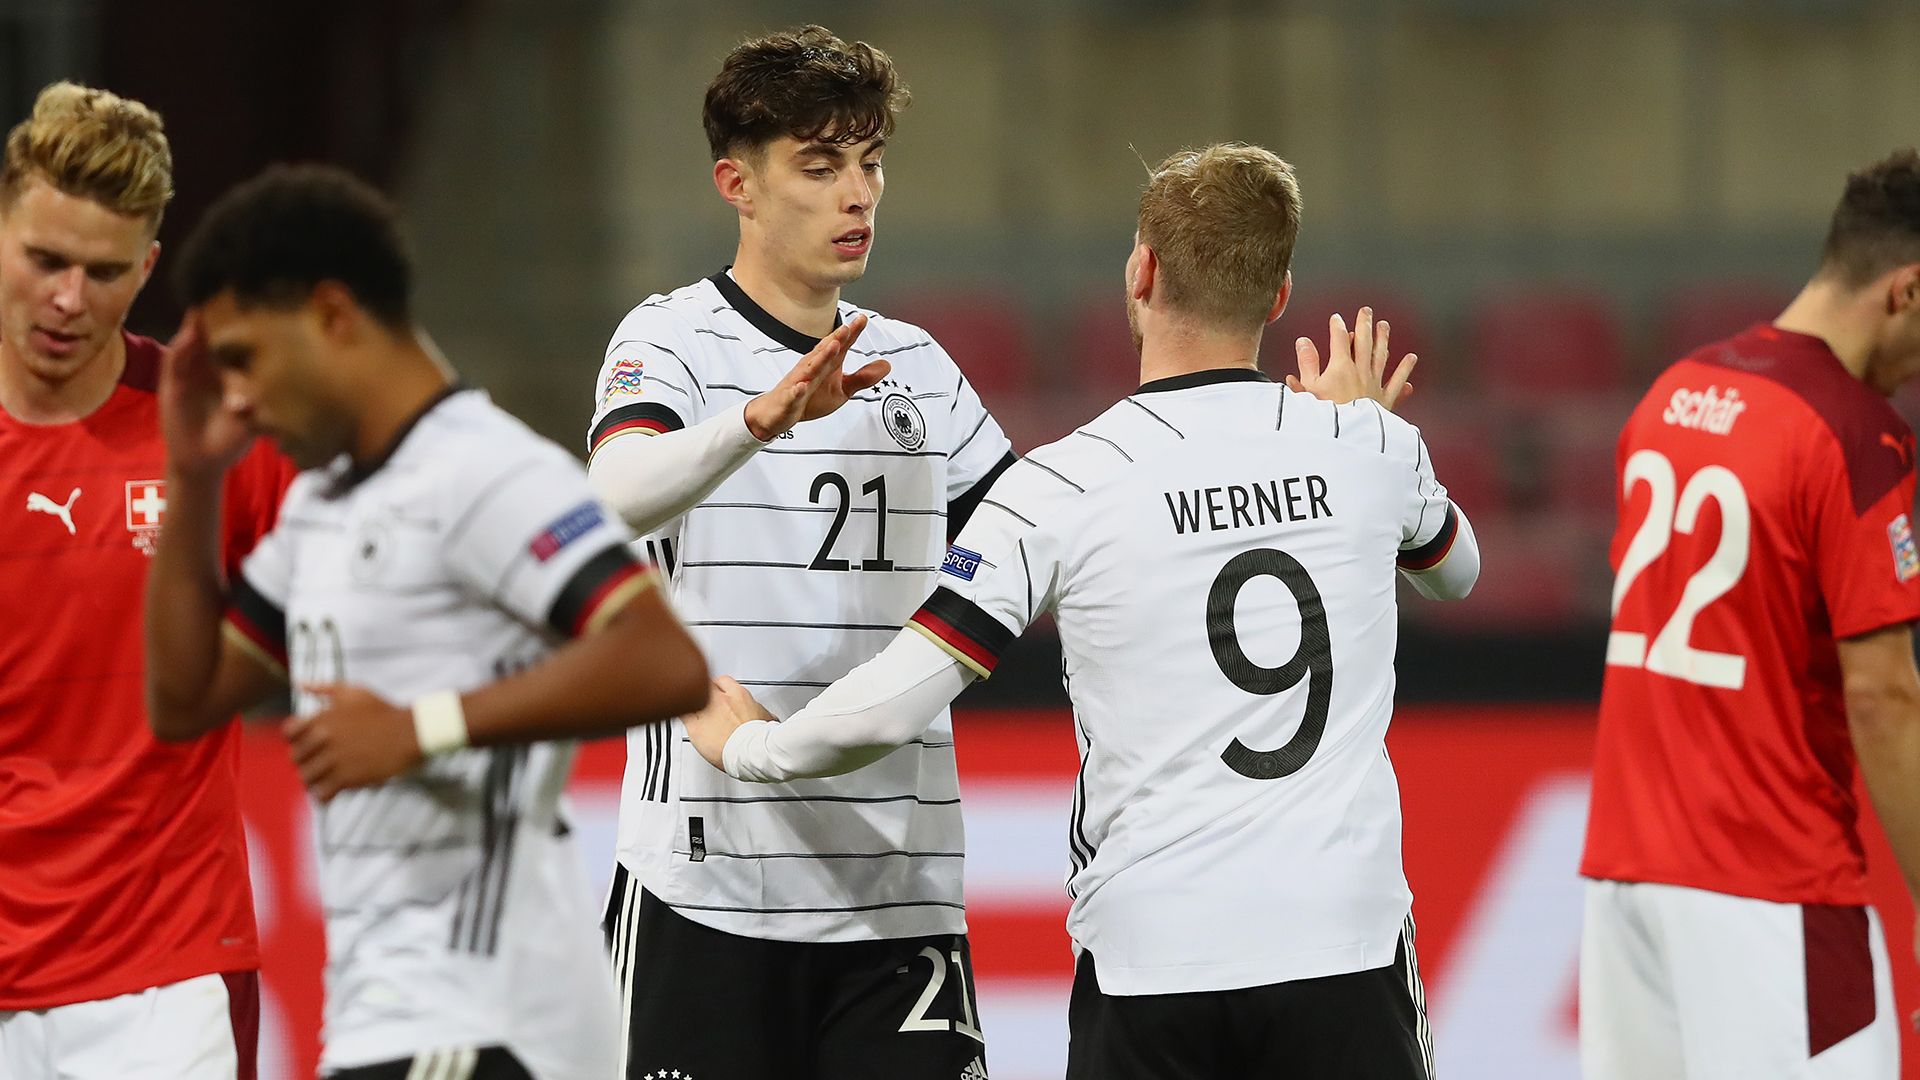 We're a young side' star Havertz happy with character shown in Switzerland comeback